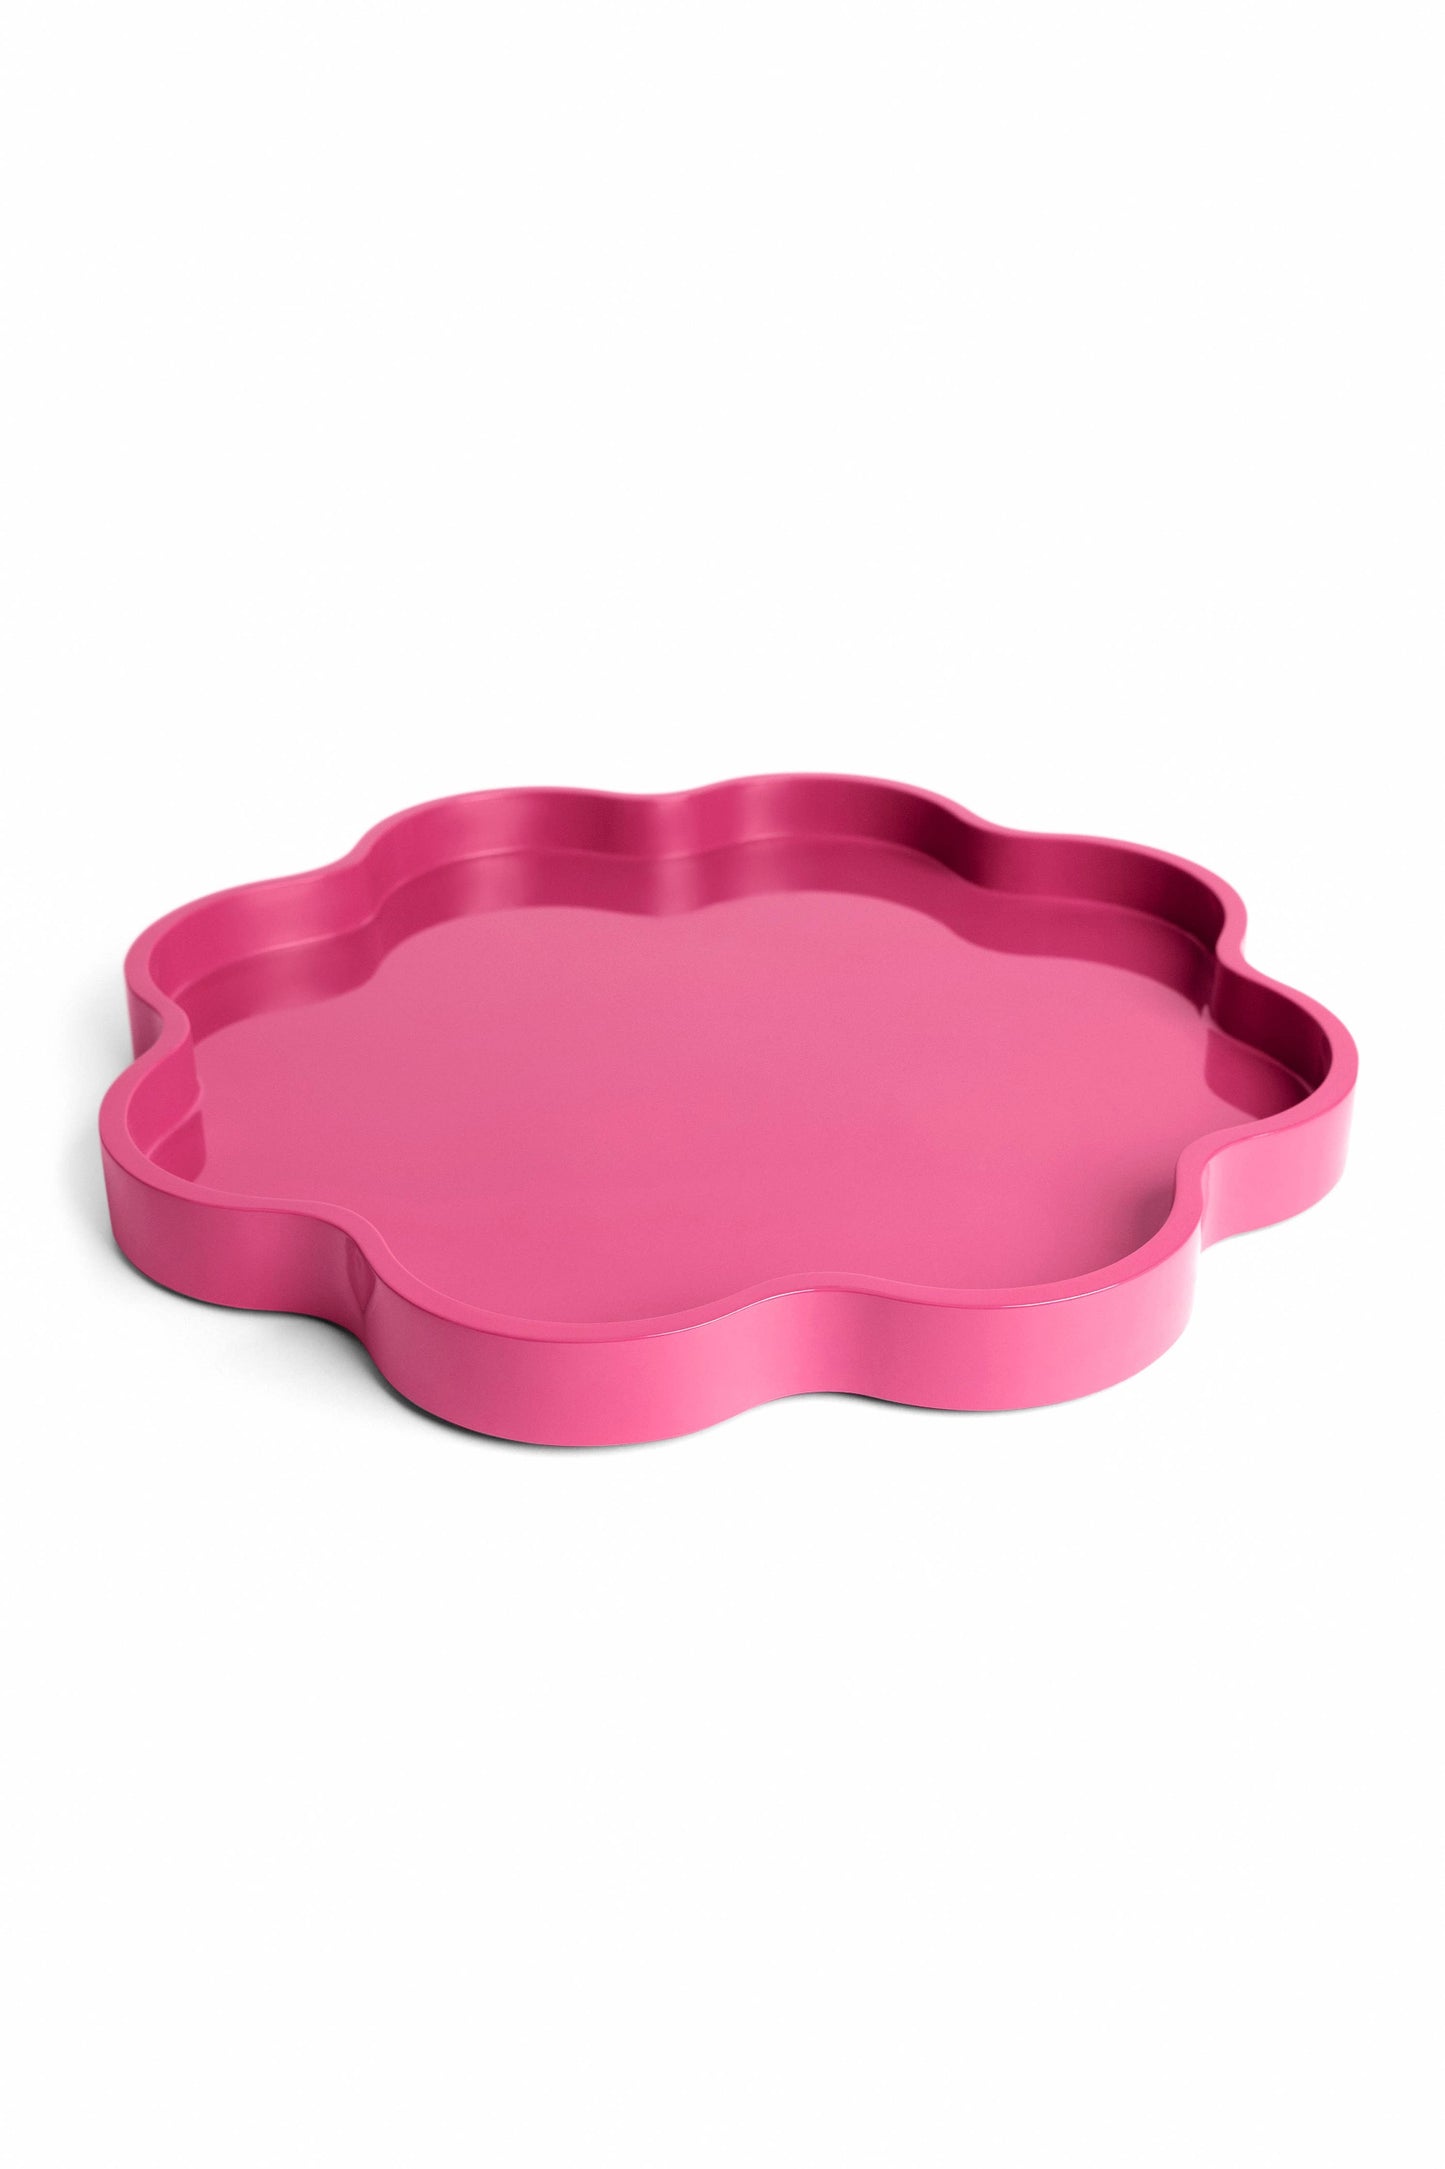 Lacquered "Bloom" Tray by Pastel Proper: Medium-Cloud